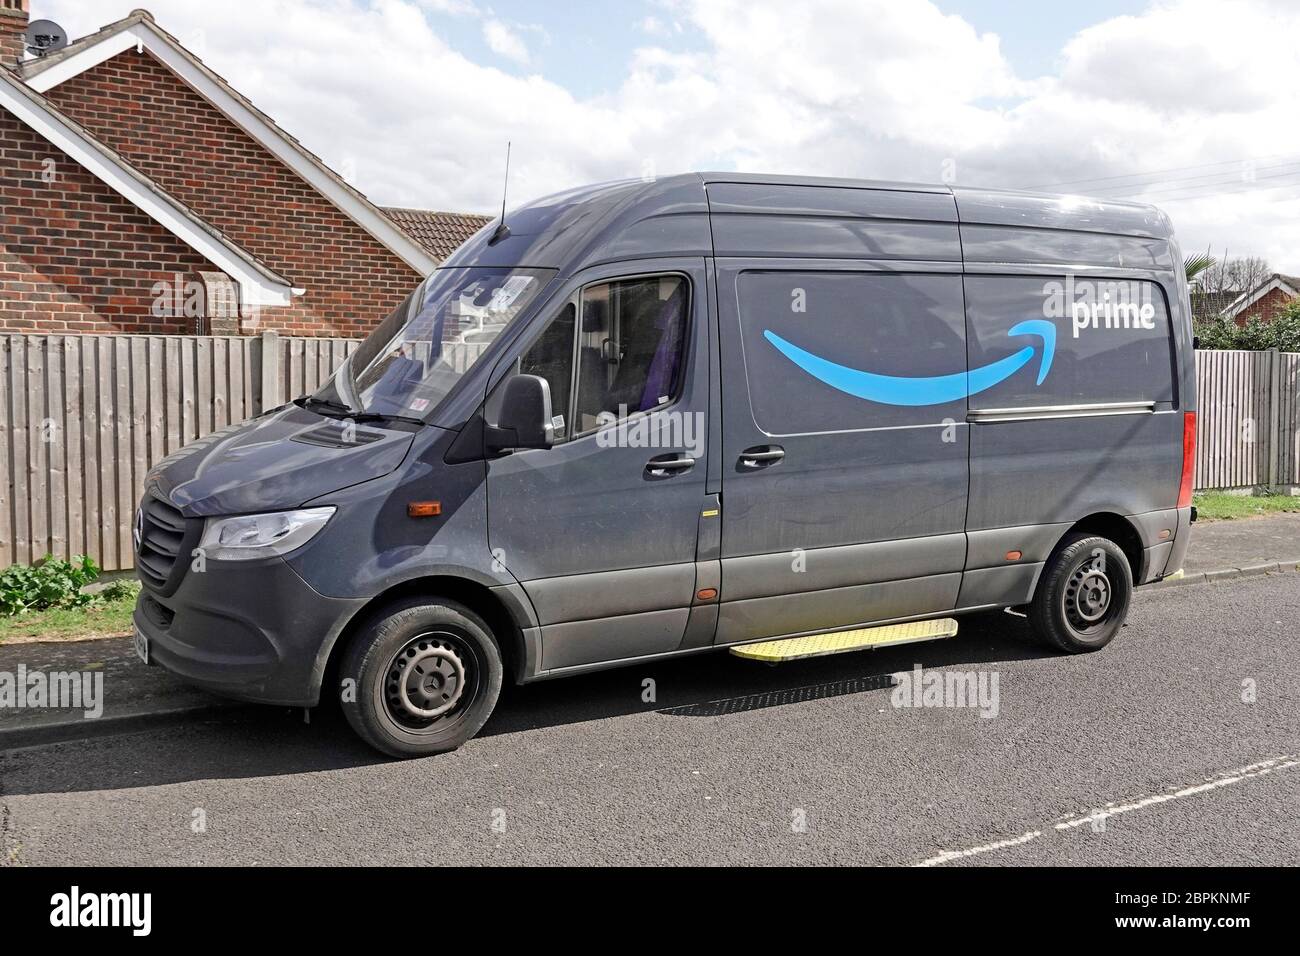 Front & side view of Mercedes Benz Sprinter van with Amazon Prime brand  business logo parked partly on pavement driver makes home parcel delivery  UK Stock Photo - Alamy